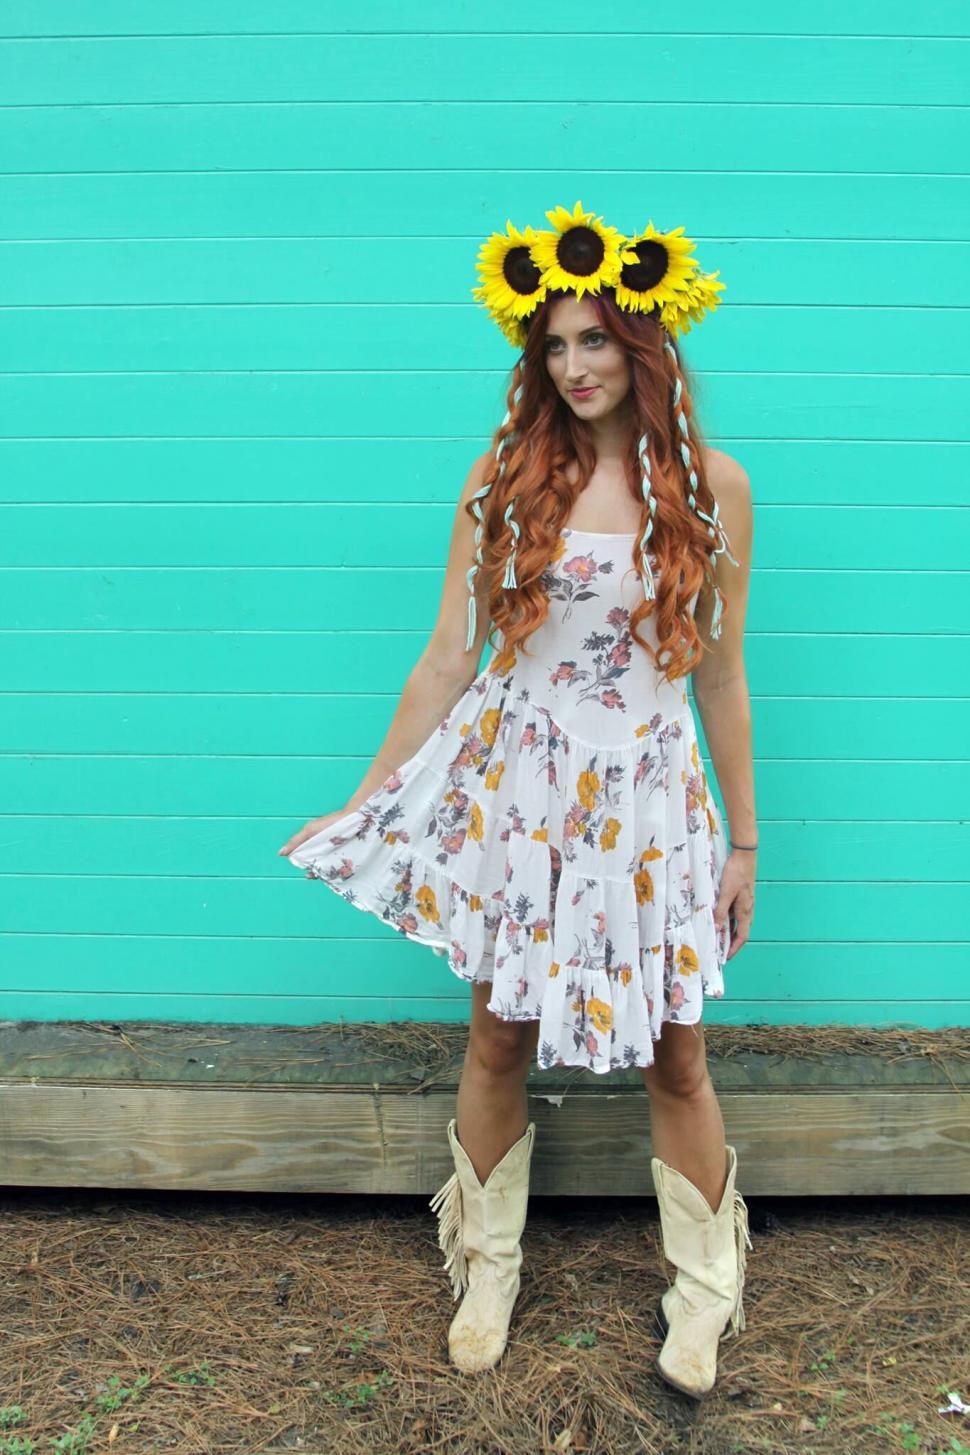 Free Image of Woman with sunflower headband standing 